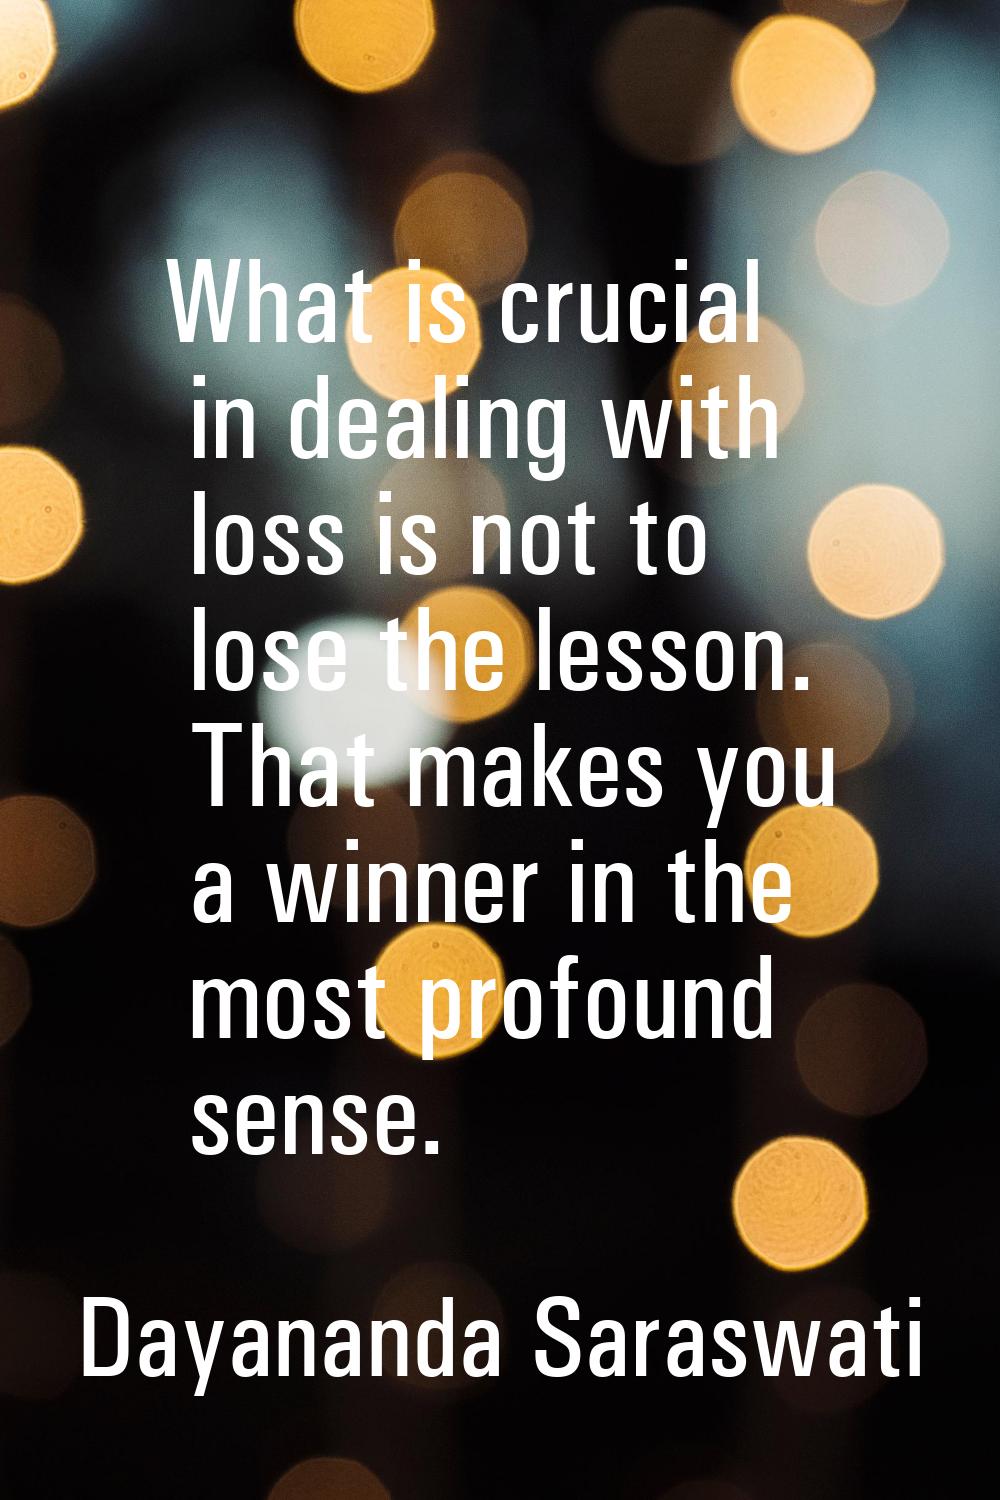 What is crucial in dealing with loss is not to lose the lesson. That makes you a winner in the most